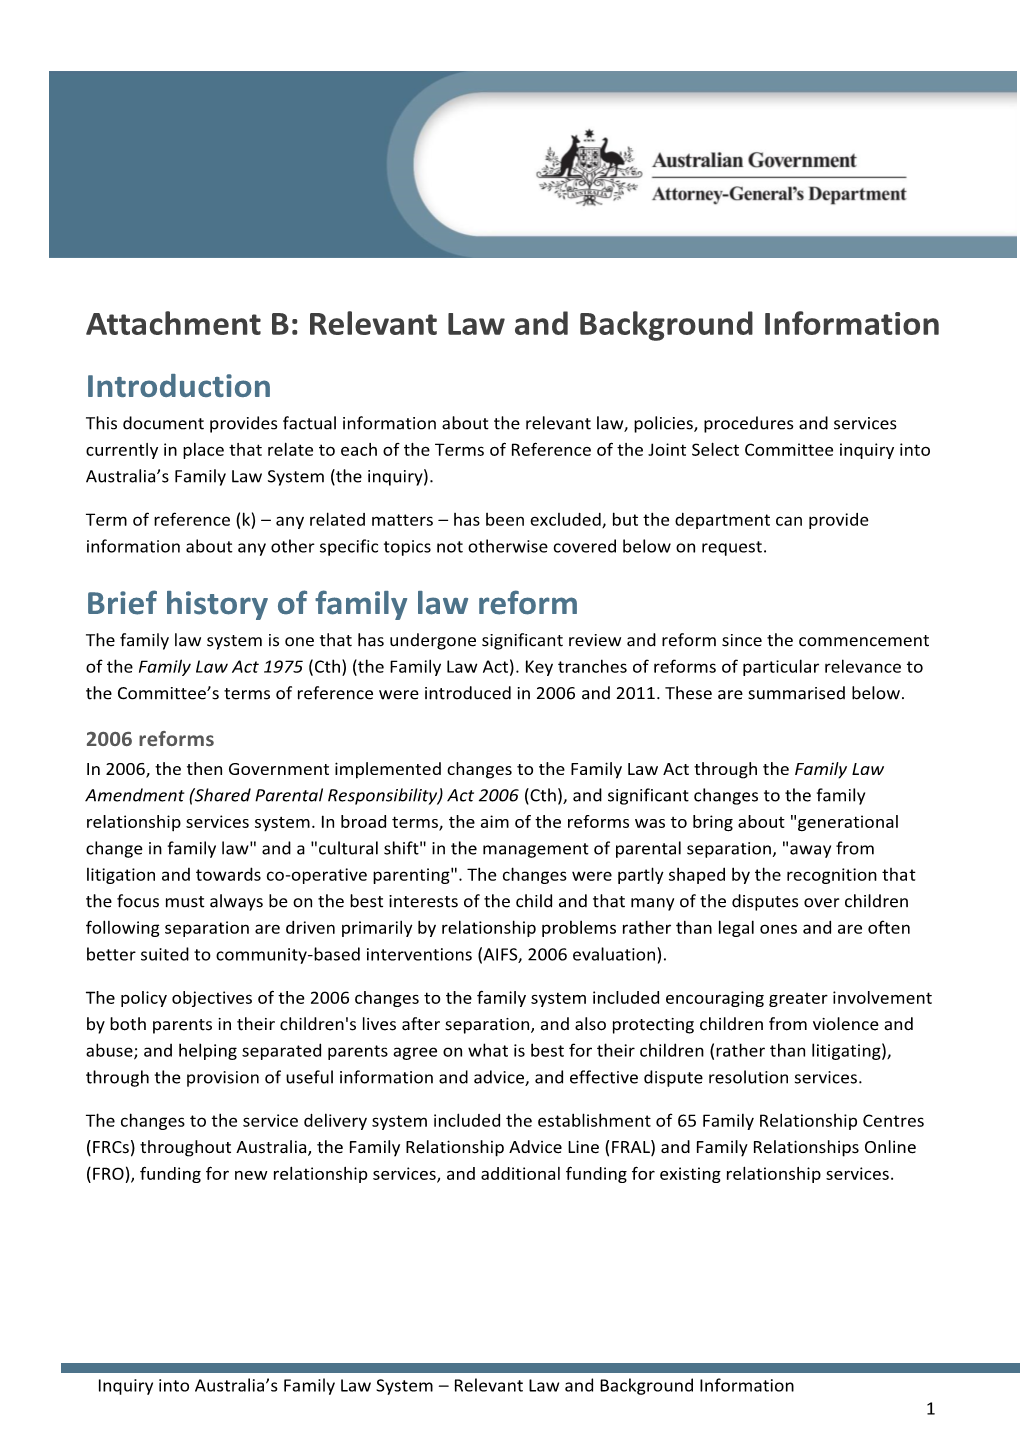 Attachment B: Relevant Law and Background Information Introduction Brief History of Family Law Reform